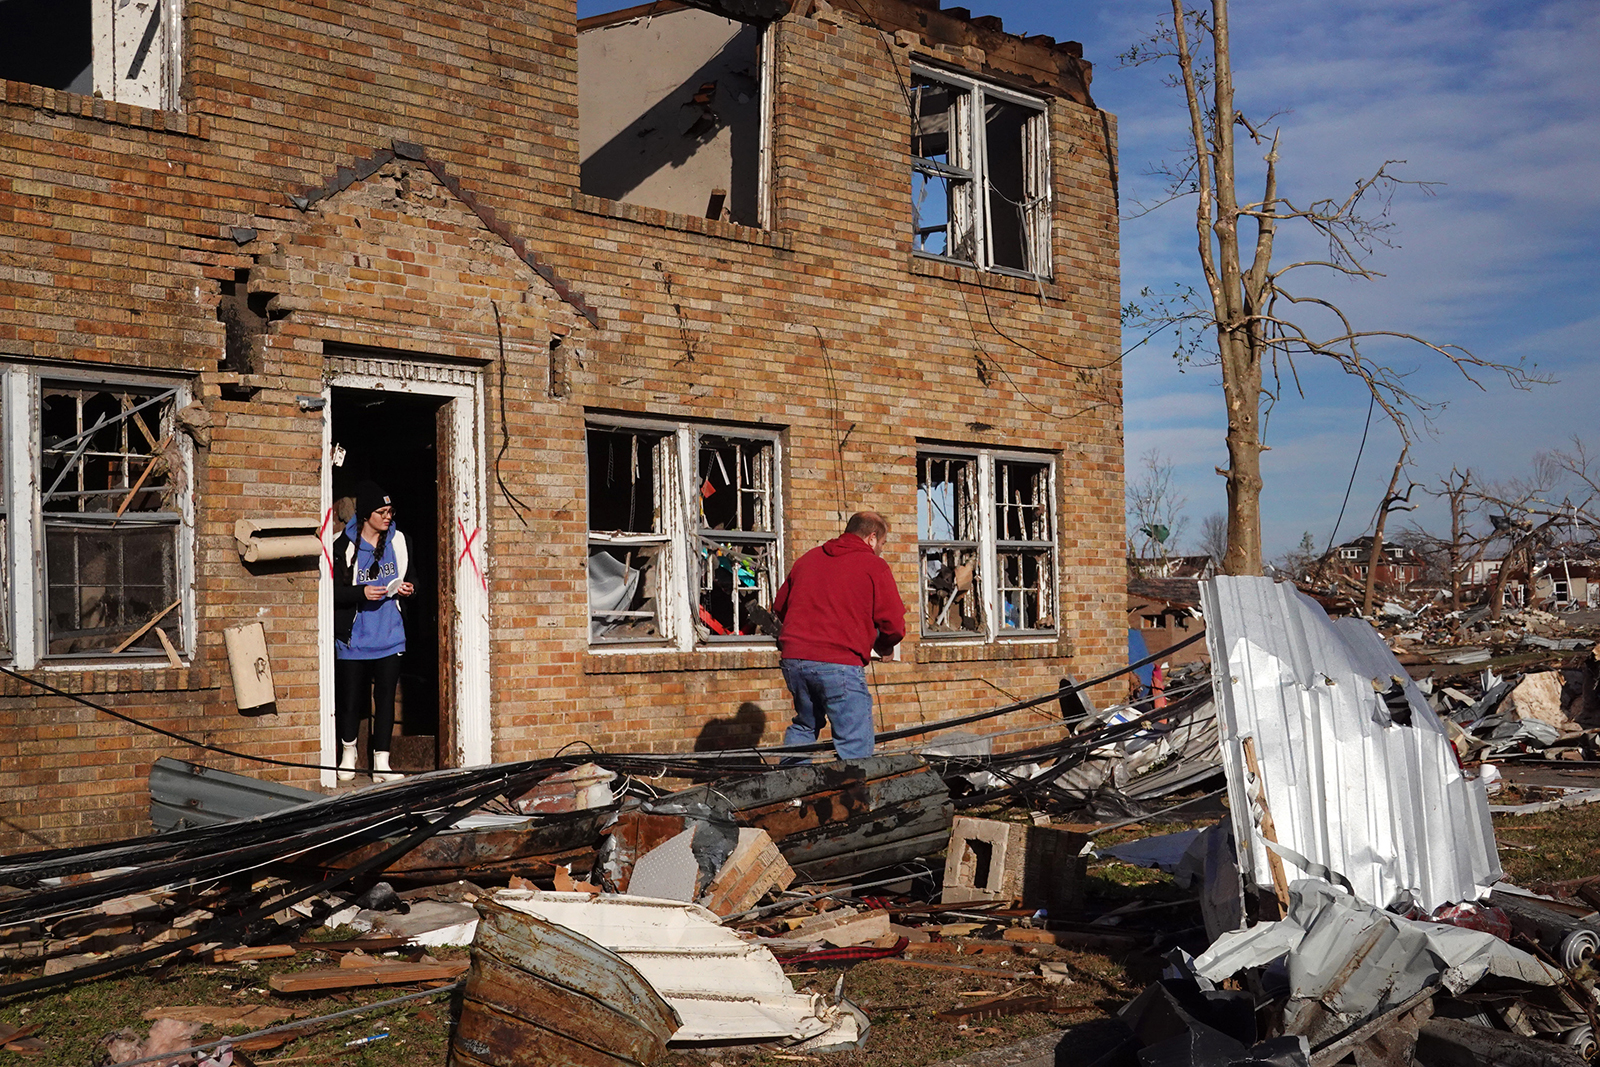 Residents begin the process of salvaging their belongings after a tornado ripped through the area the previous evening on December 11, in Mayfield, Kentucky. (Scott Olson/Getty Images)